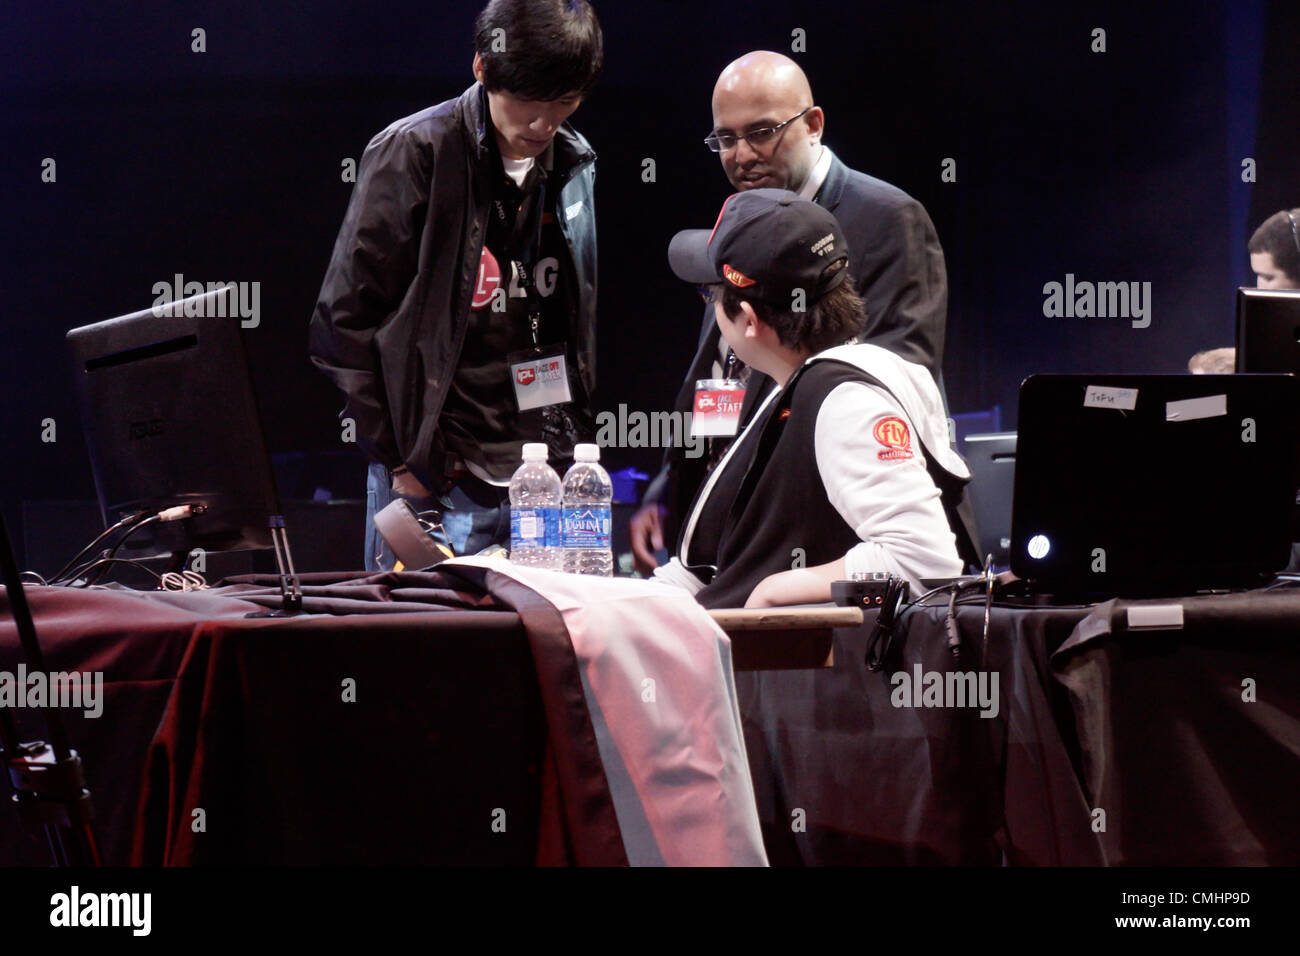 August 11, 2012. San Francisco, USA. IPL Faceoff, Starcraft 2 Team League Arena at Masonic Center in San Francisco. IM Nestea, three times GSL champion, discussing his rematch with IPL referees. Stock Photo